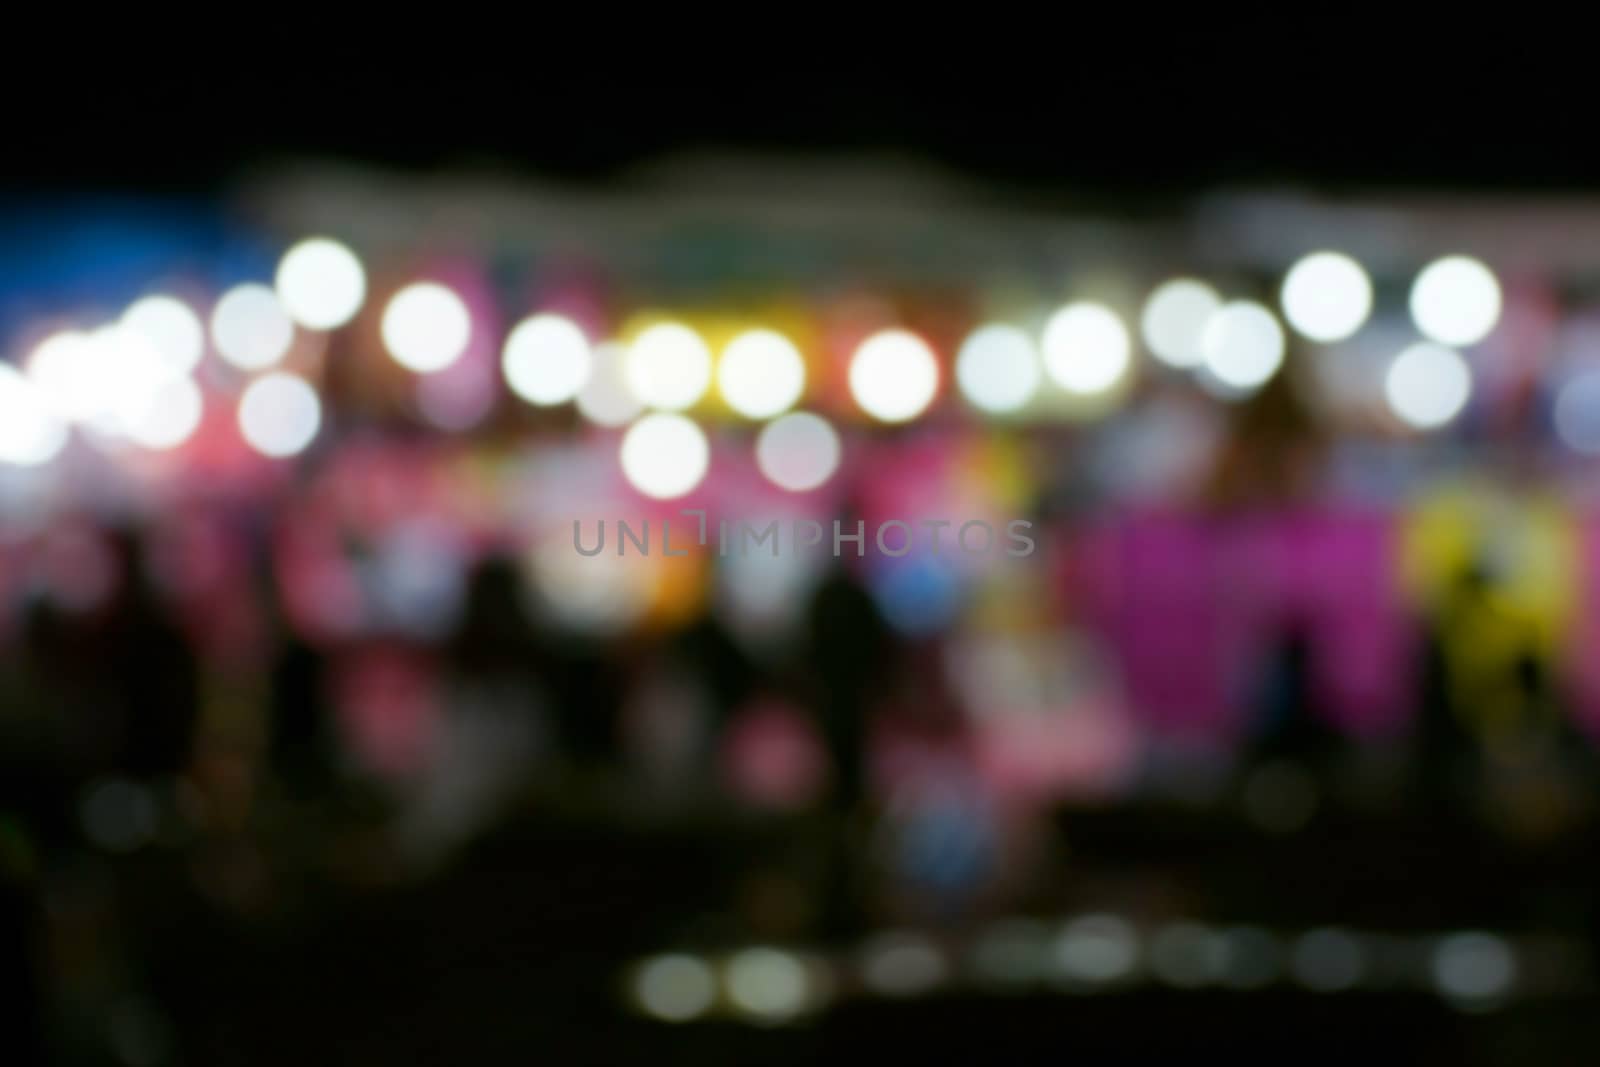 Defocused and blurred image of people at amusement park at night for background usage.